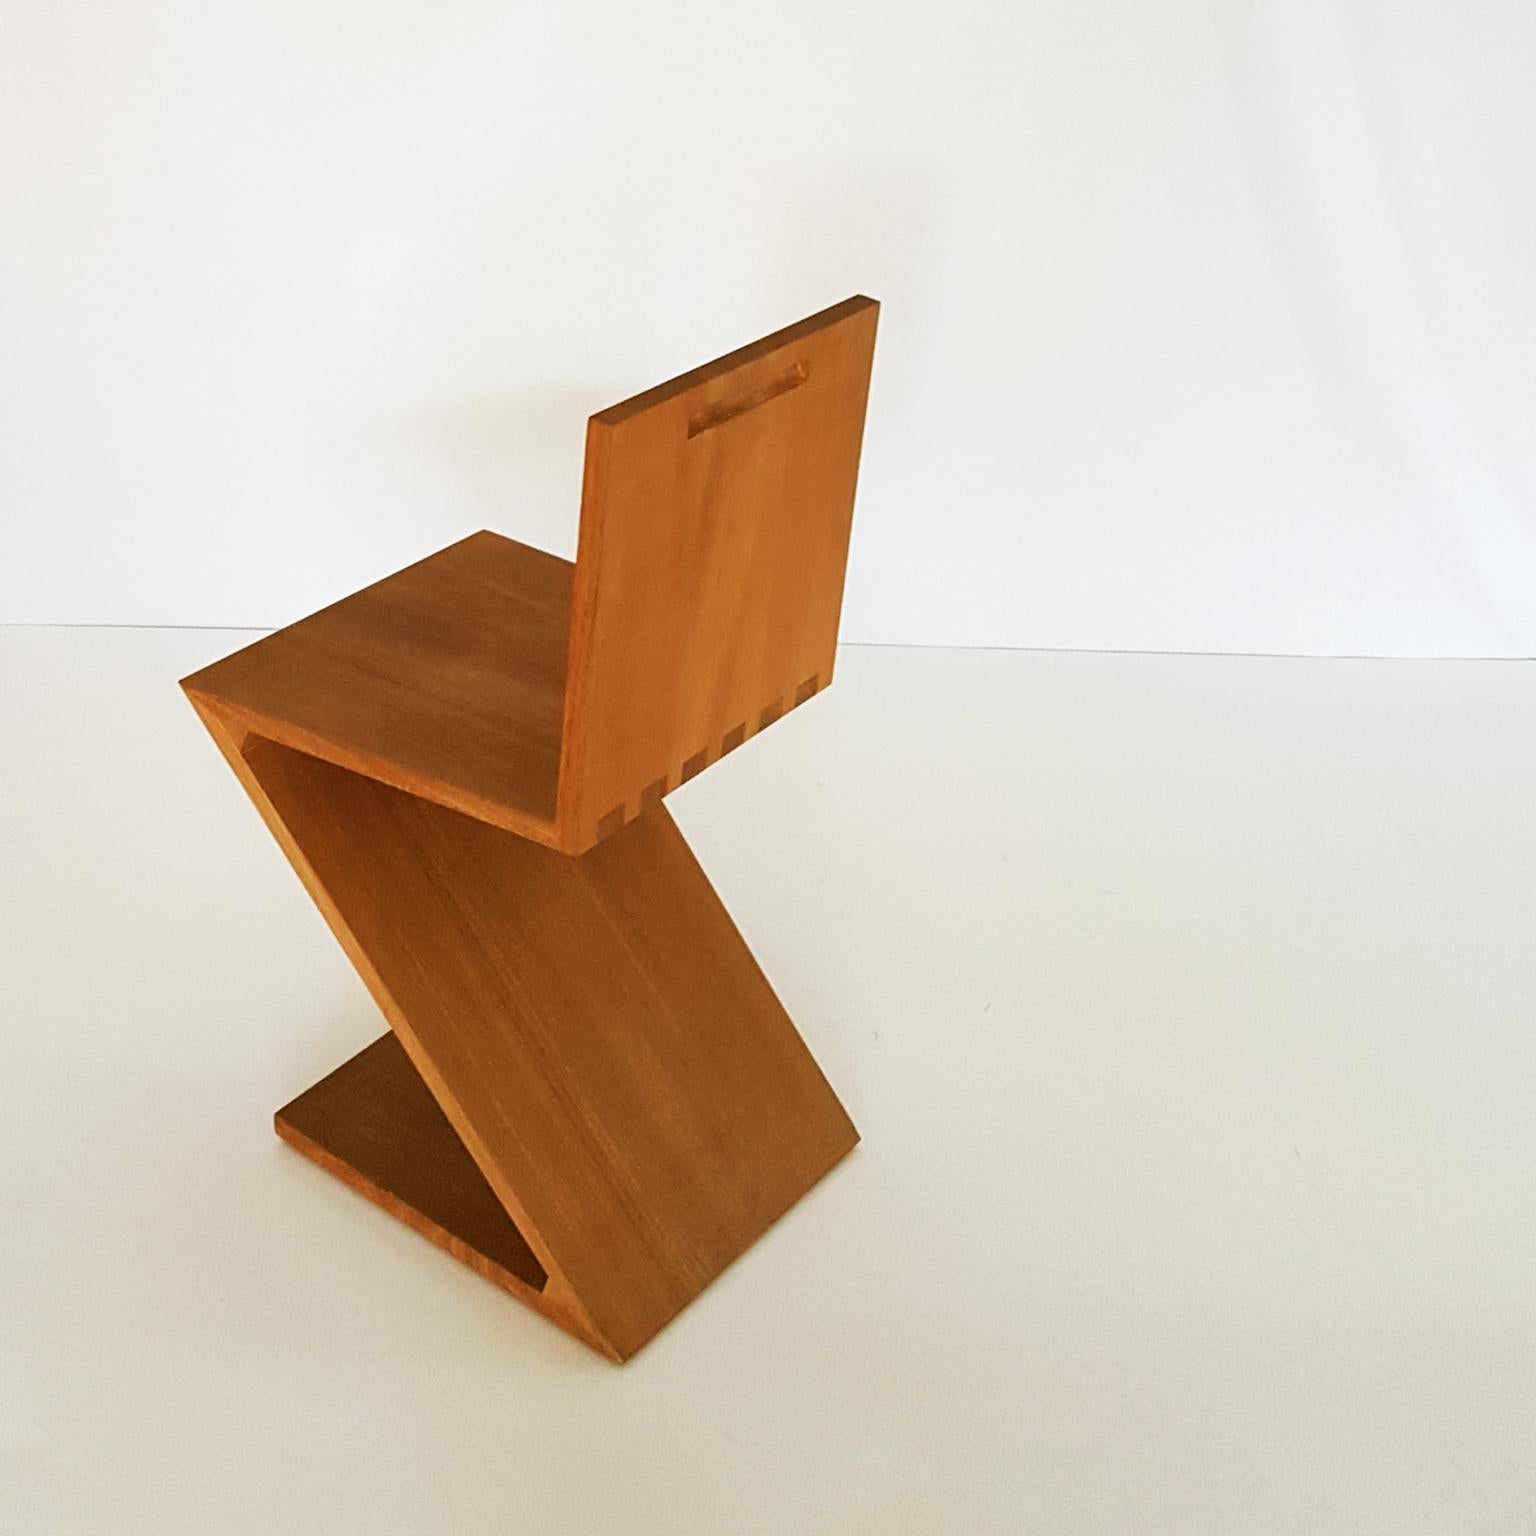 Italian Gerrit Rietvel Unfinished Natural Elm Wood Zig Zag Chair by Cassina, 1973